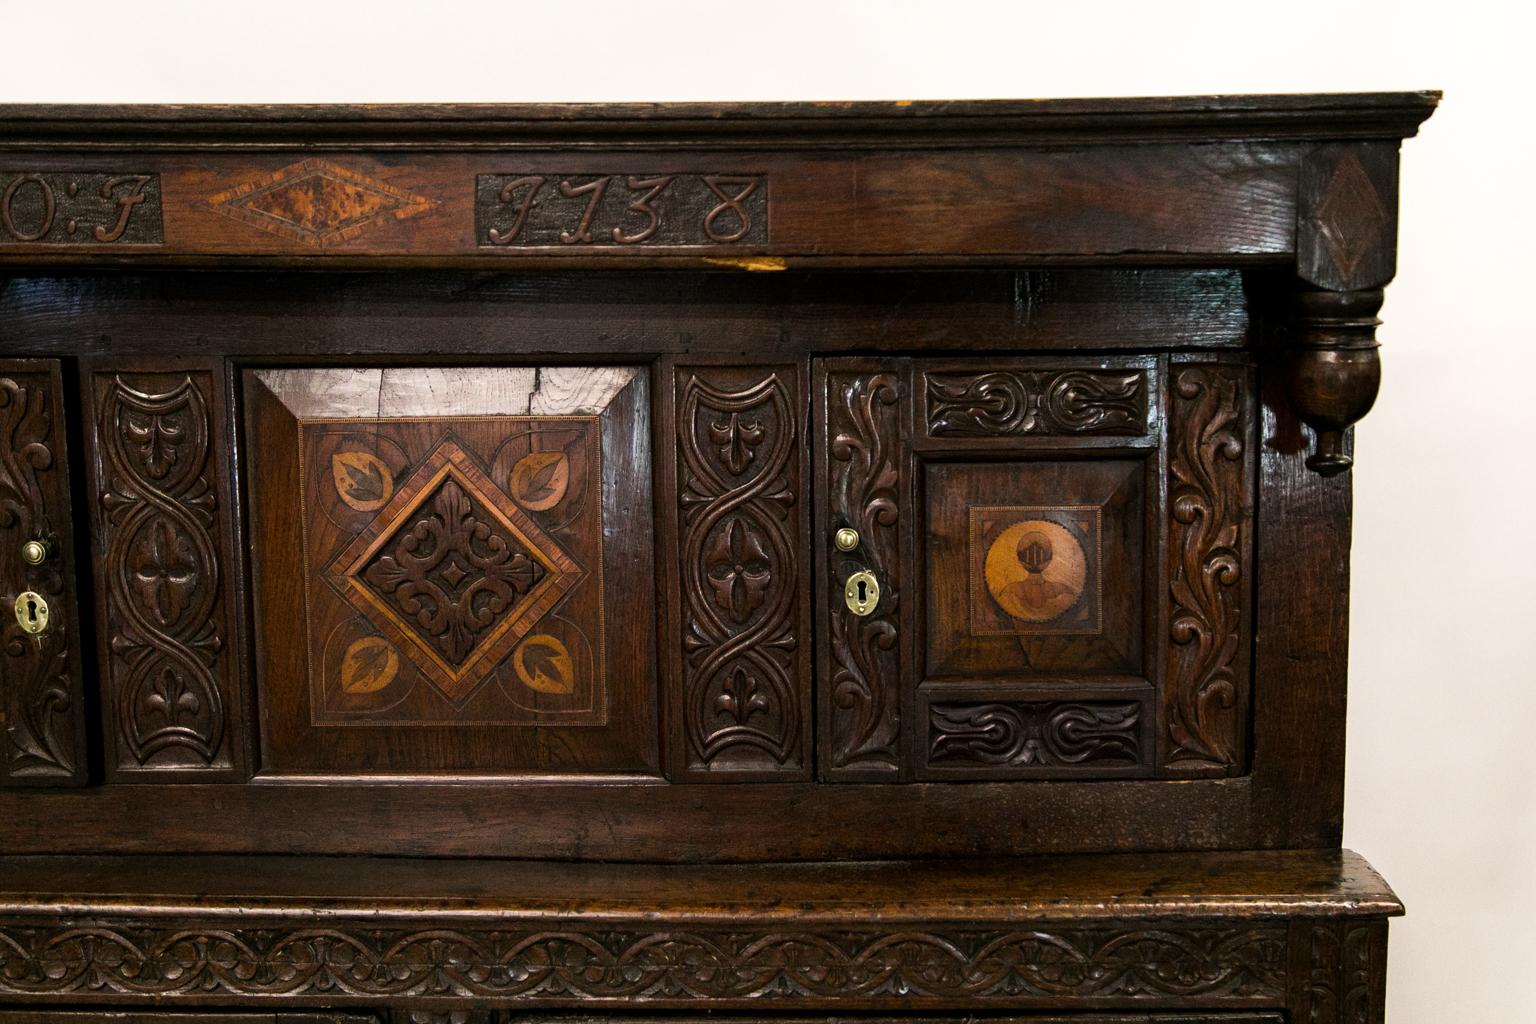 This court cupboard has protruding free standing carved pendants on the top. The upper doors have raised panels inlaid with satinwood and ebony figures of stylized knights. The center panels of the upper half and two lower doors are inlaid with